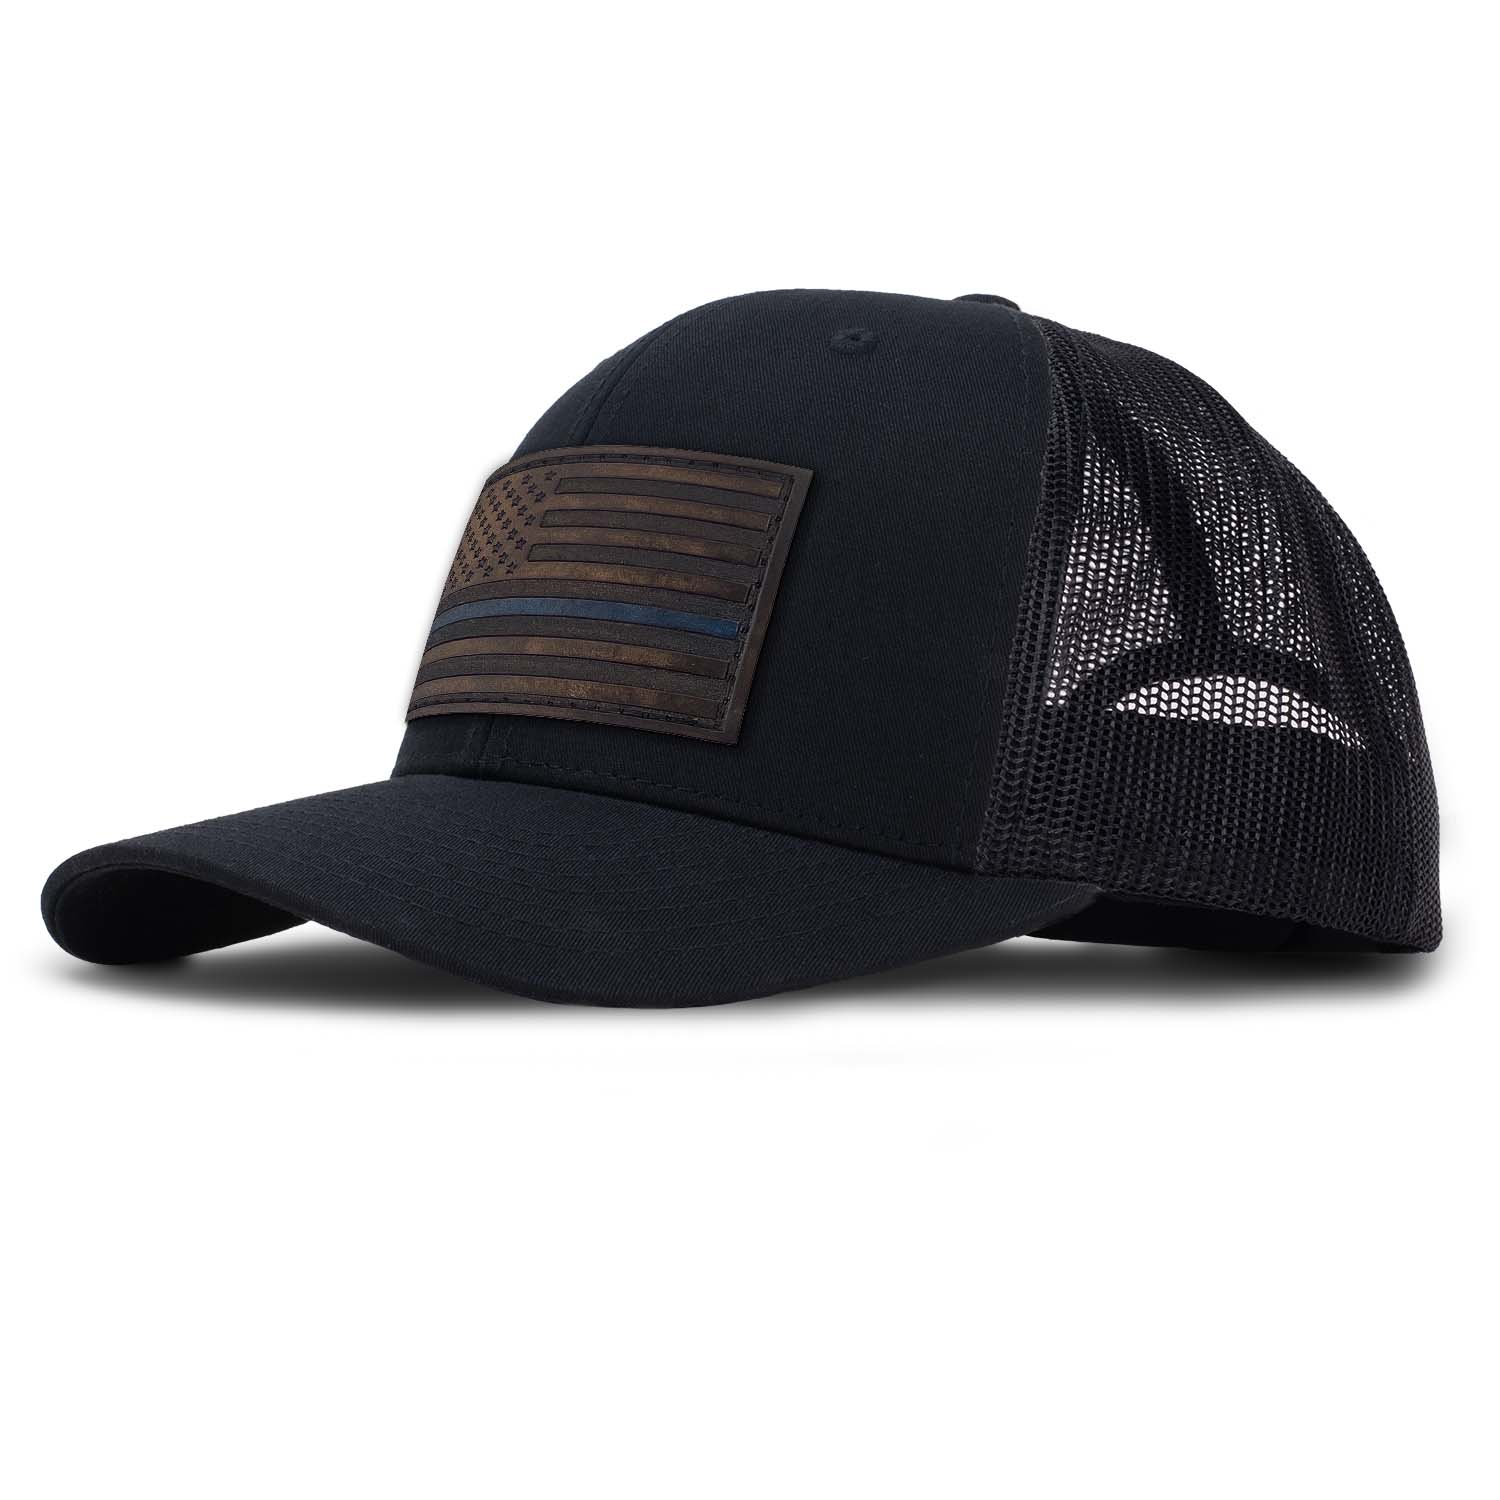 Revolution Mfg Thin Blue Line full grain leather American flag patch on a classic black trucker hat with black mesh